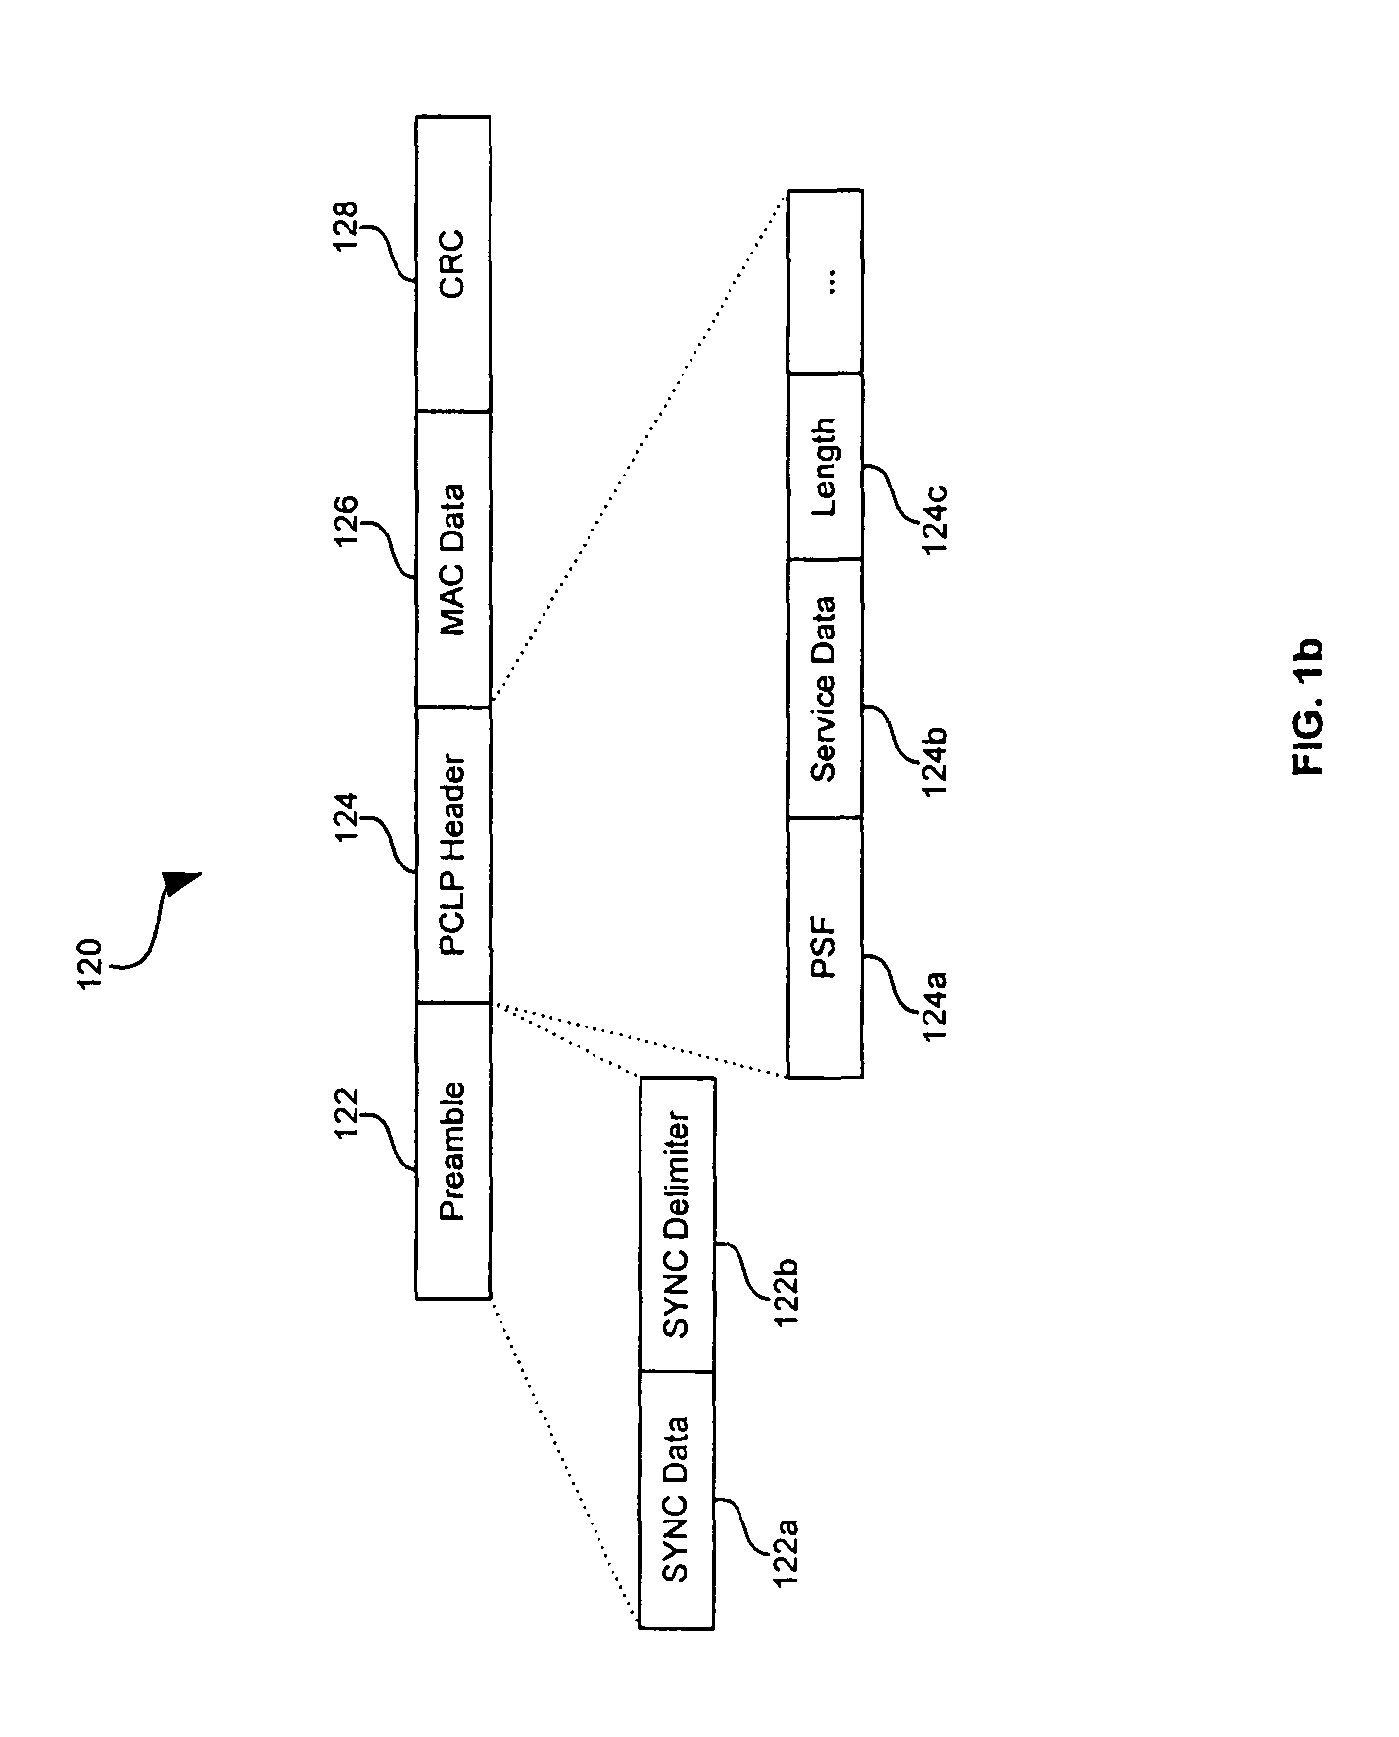 System and method for access point (AP) aggregation and resiliency in a hybrid wired/wireless local area network